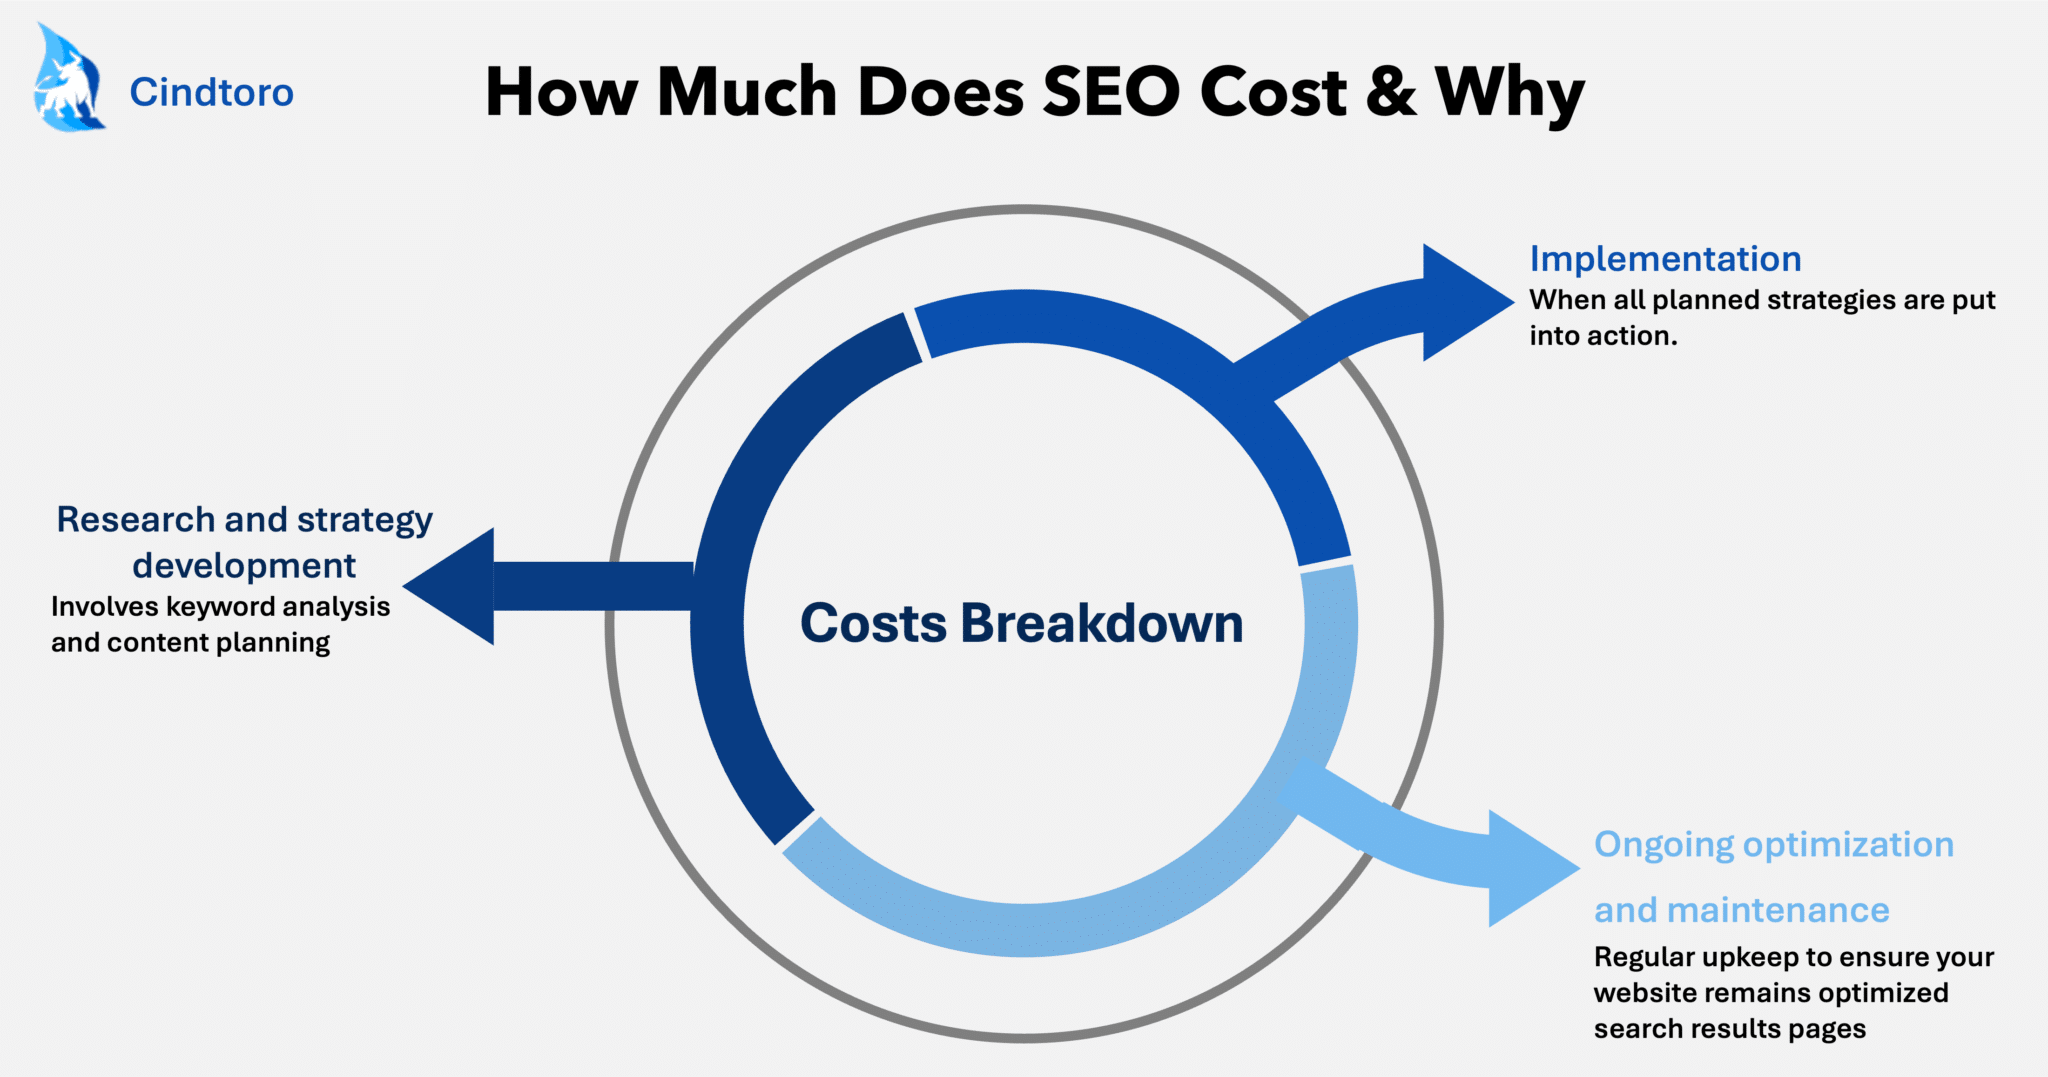 How Much Does SEO Cost & Why?